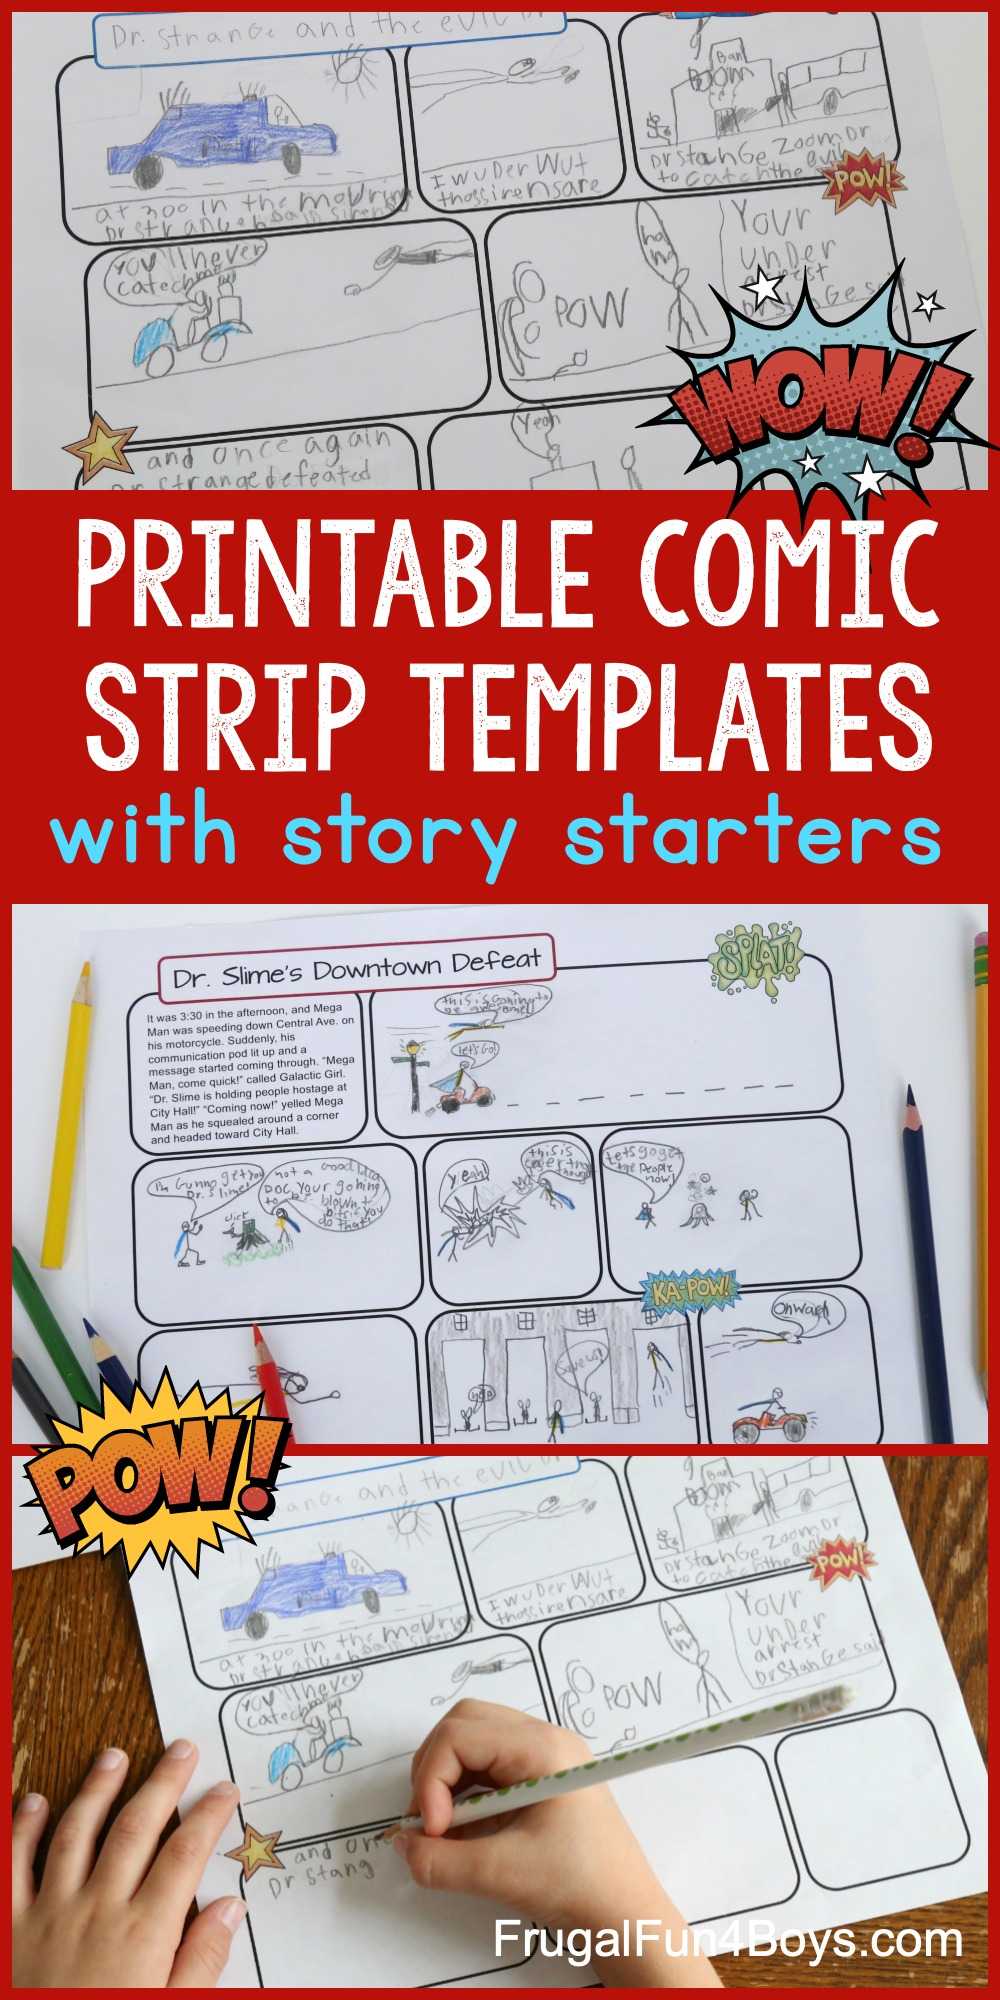 Printable Comic Strip Templates With Story Starters – Frugal Intended For Printable Blank Comic Strip Template For Kids